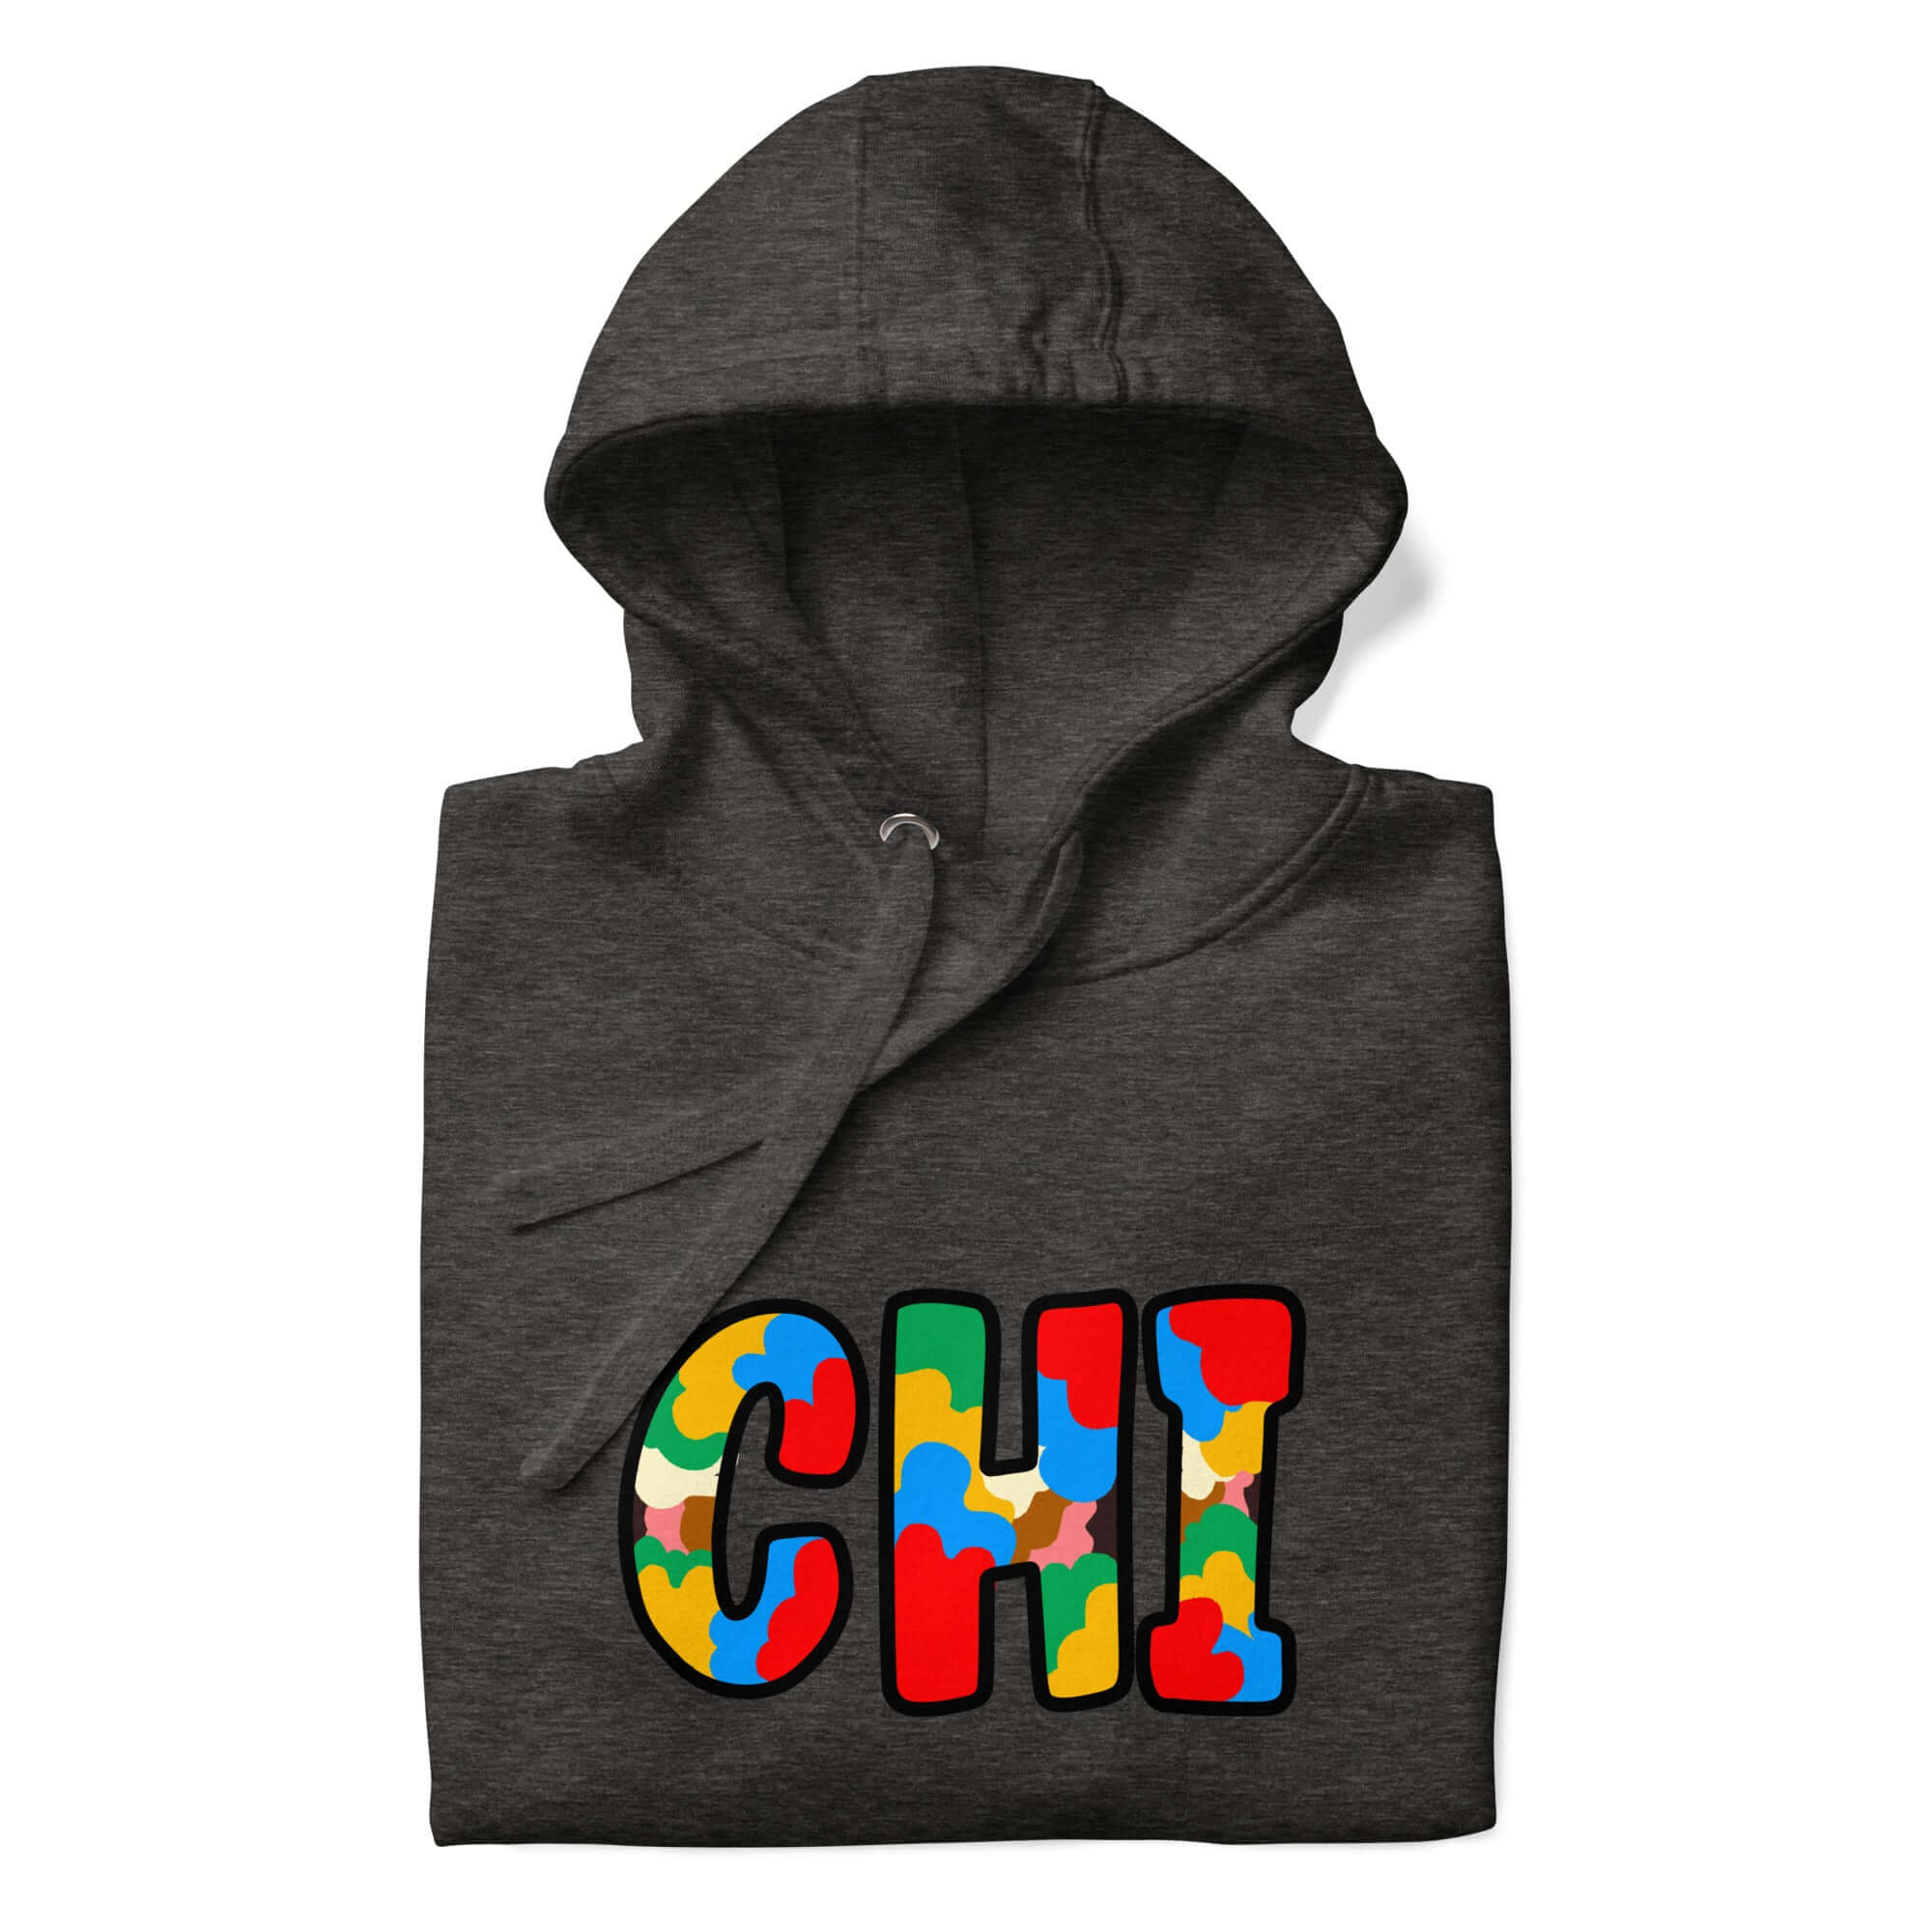 The City Collection CHI Unisex Hoodie